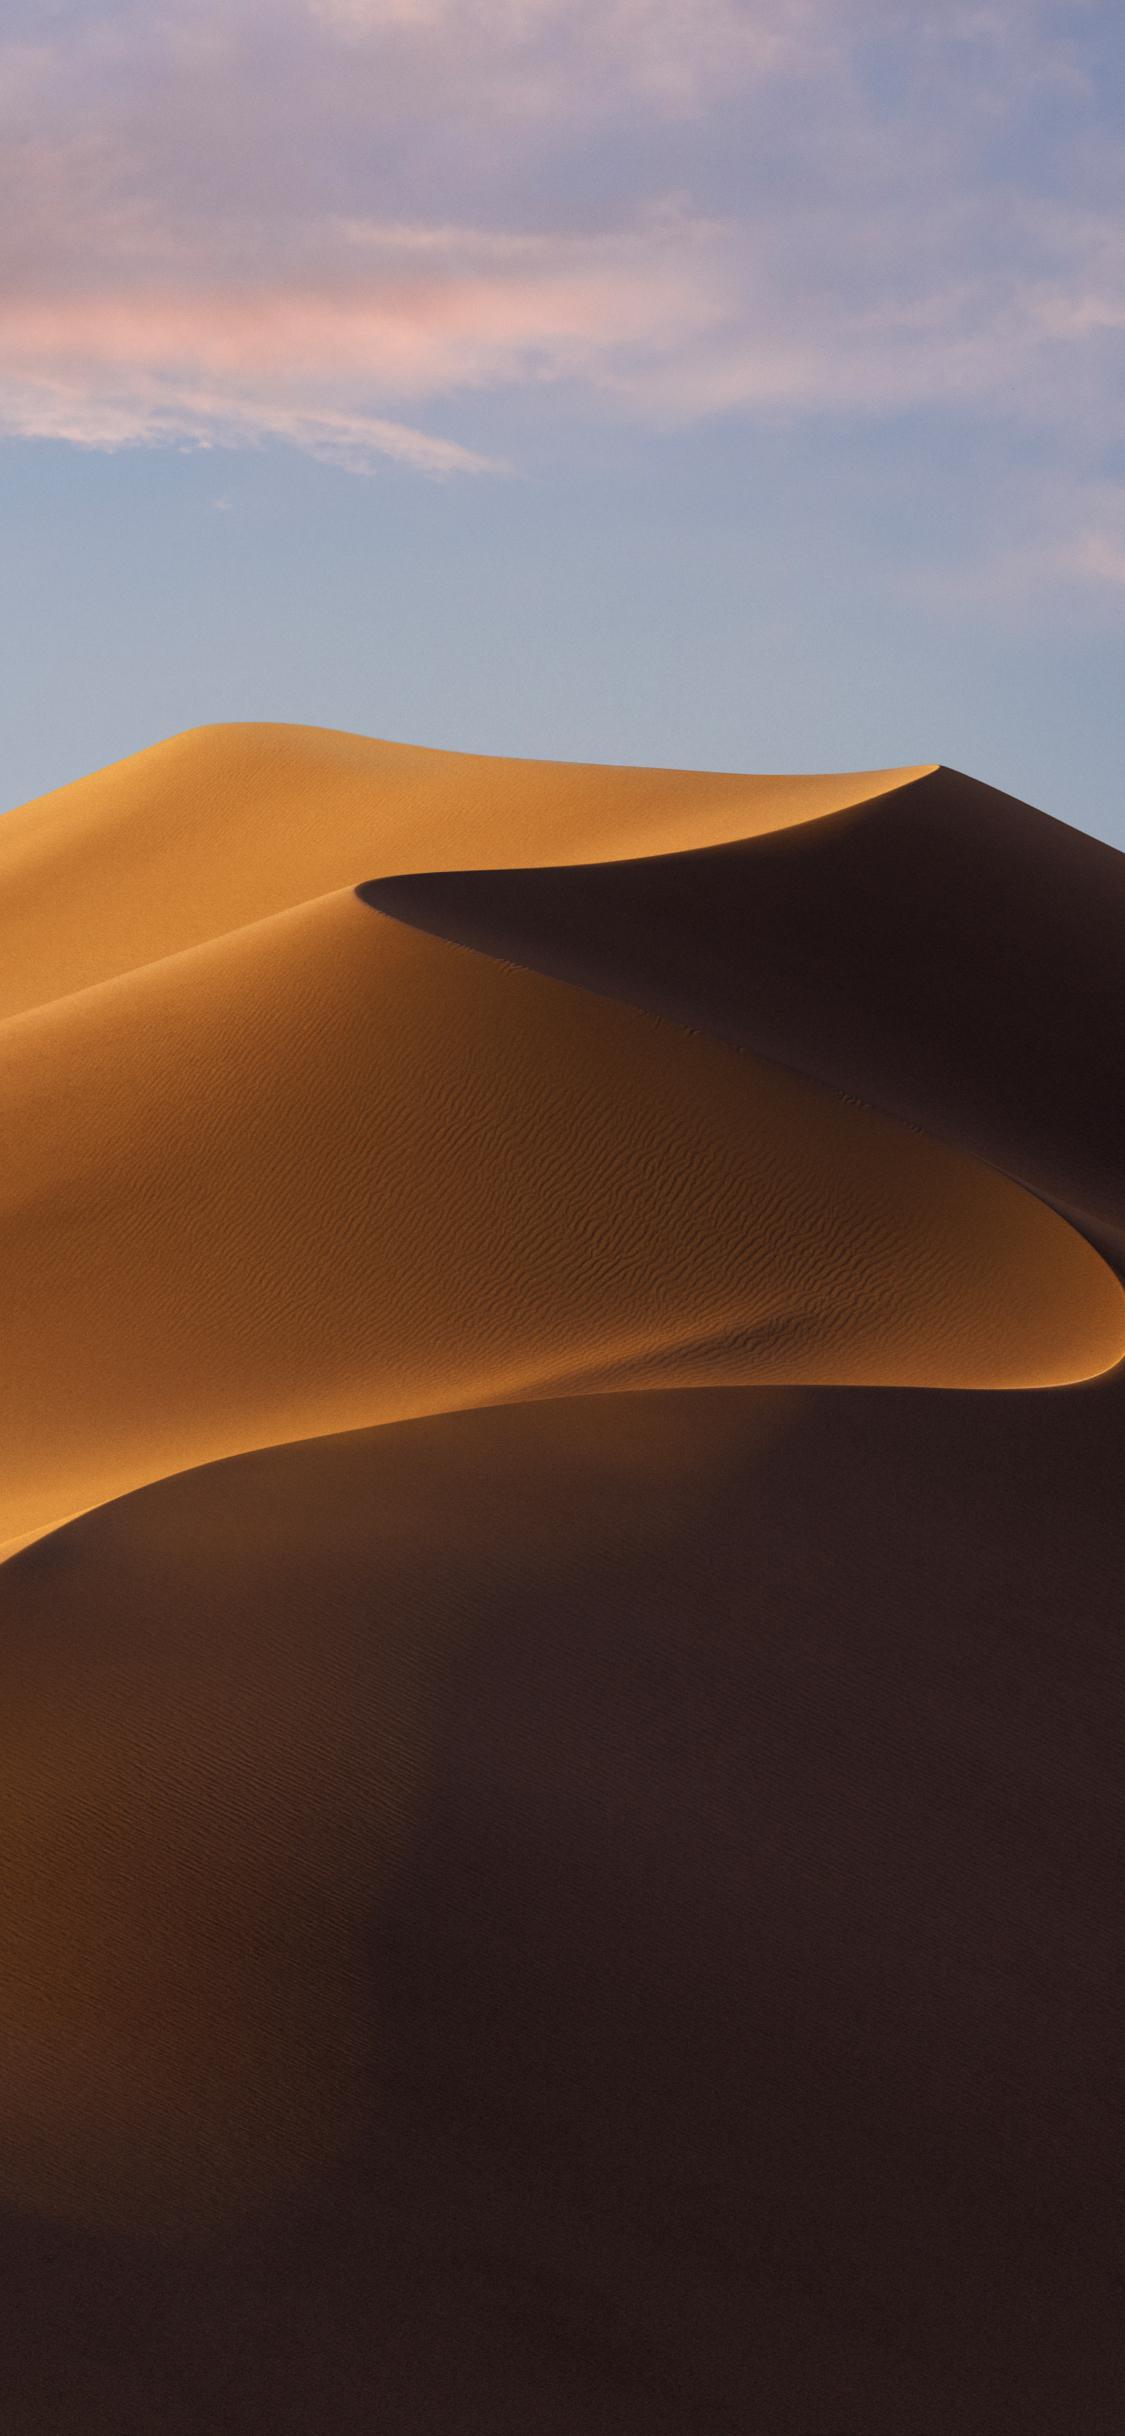 Download macOS Mojave wallpaper for desktop and iPhone